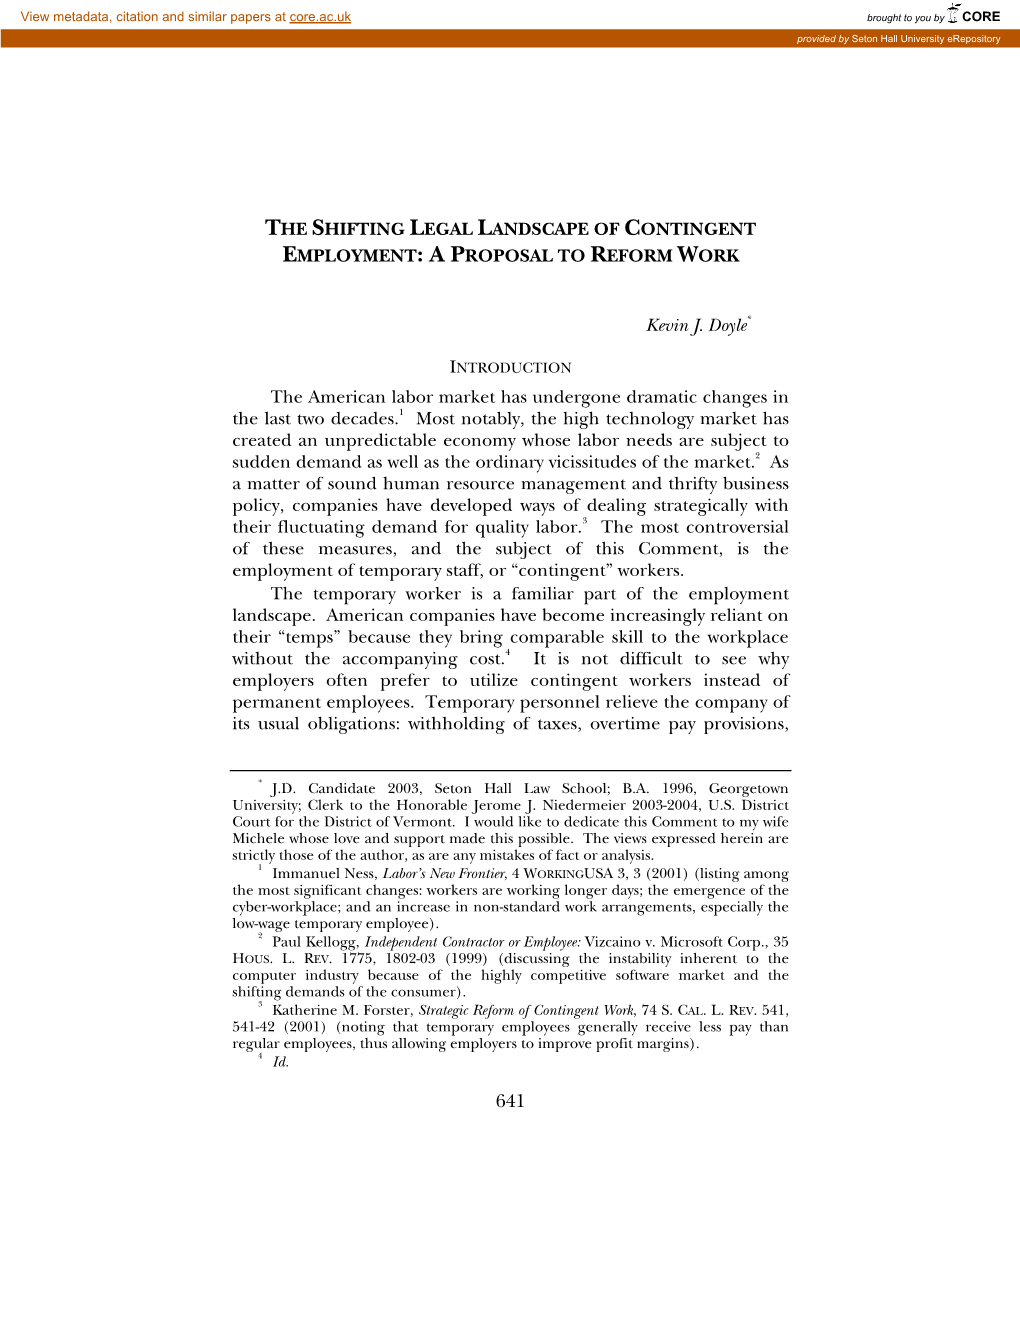 The Shifting Legal Landscape of Contingent Employment: a Proposal to Reform Work